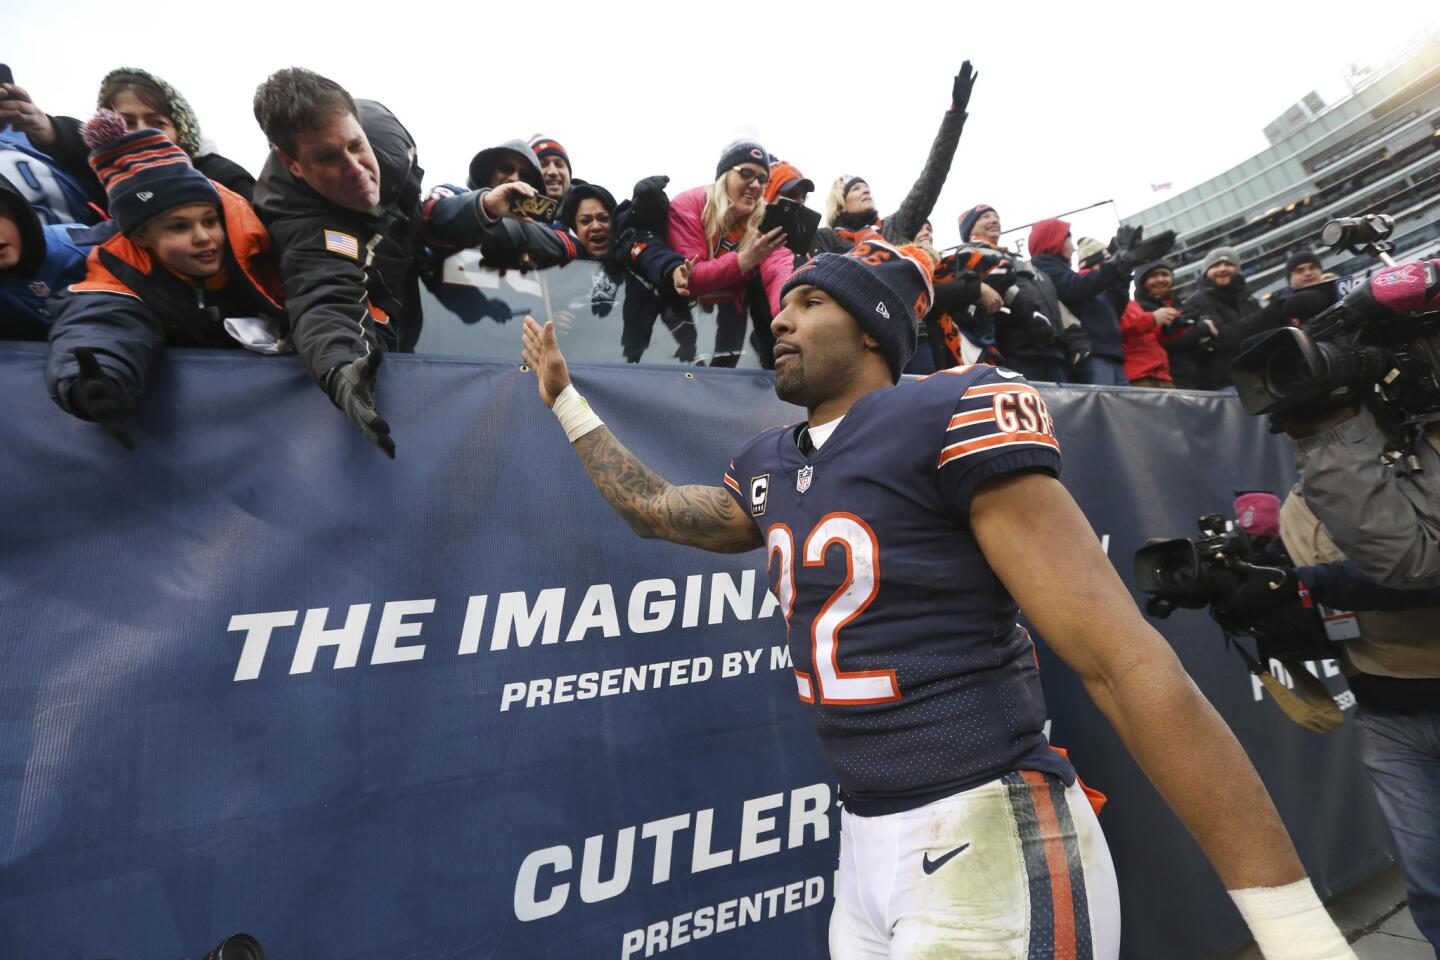 Matt Forte high-fives fans before walking off the field following his team's 24-20 loss to the Lions at Soldier Field.